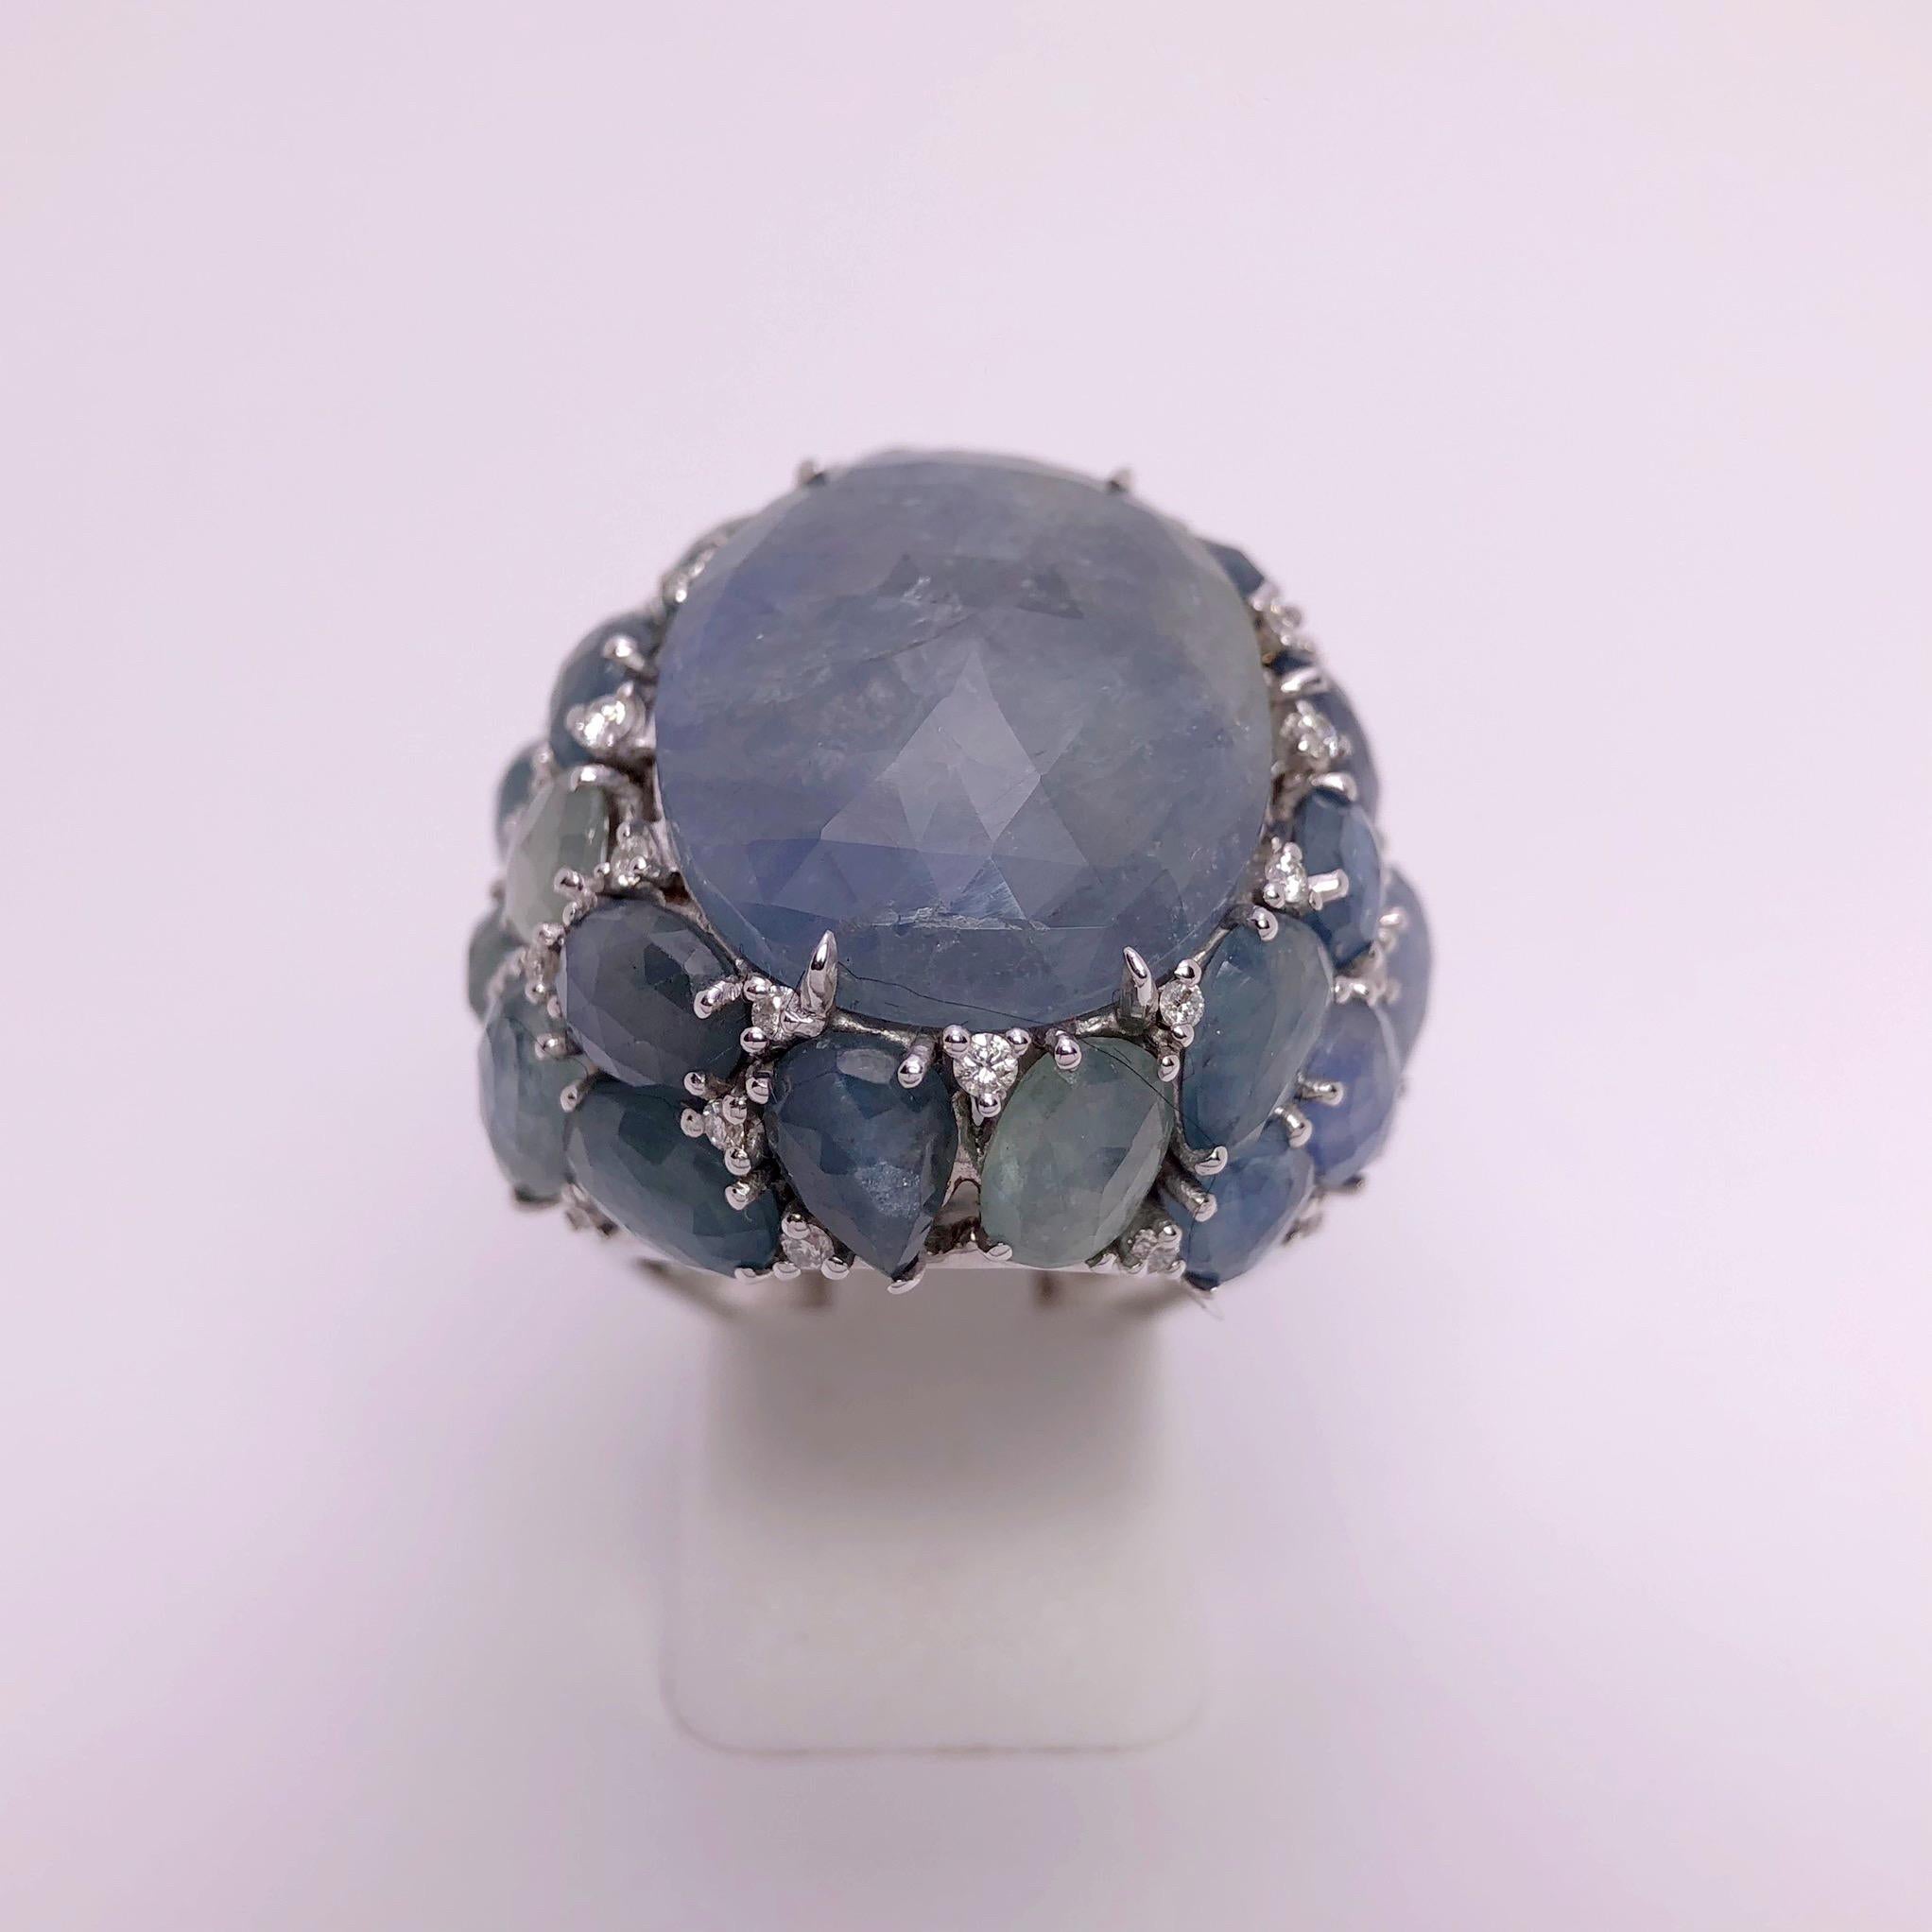 Created by Giovanni Ferraris of Italy , this Sapphire ring is a work of art. The center light blue oval opaque sapphire is a briolette faceted cabachon that measures 21.5mm x 17mm. . The ring has a spectacular setting designed with icy blue and blue